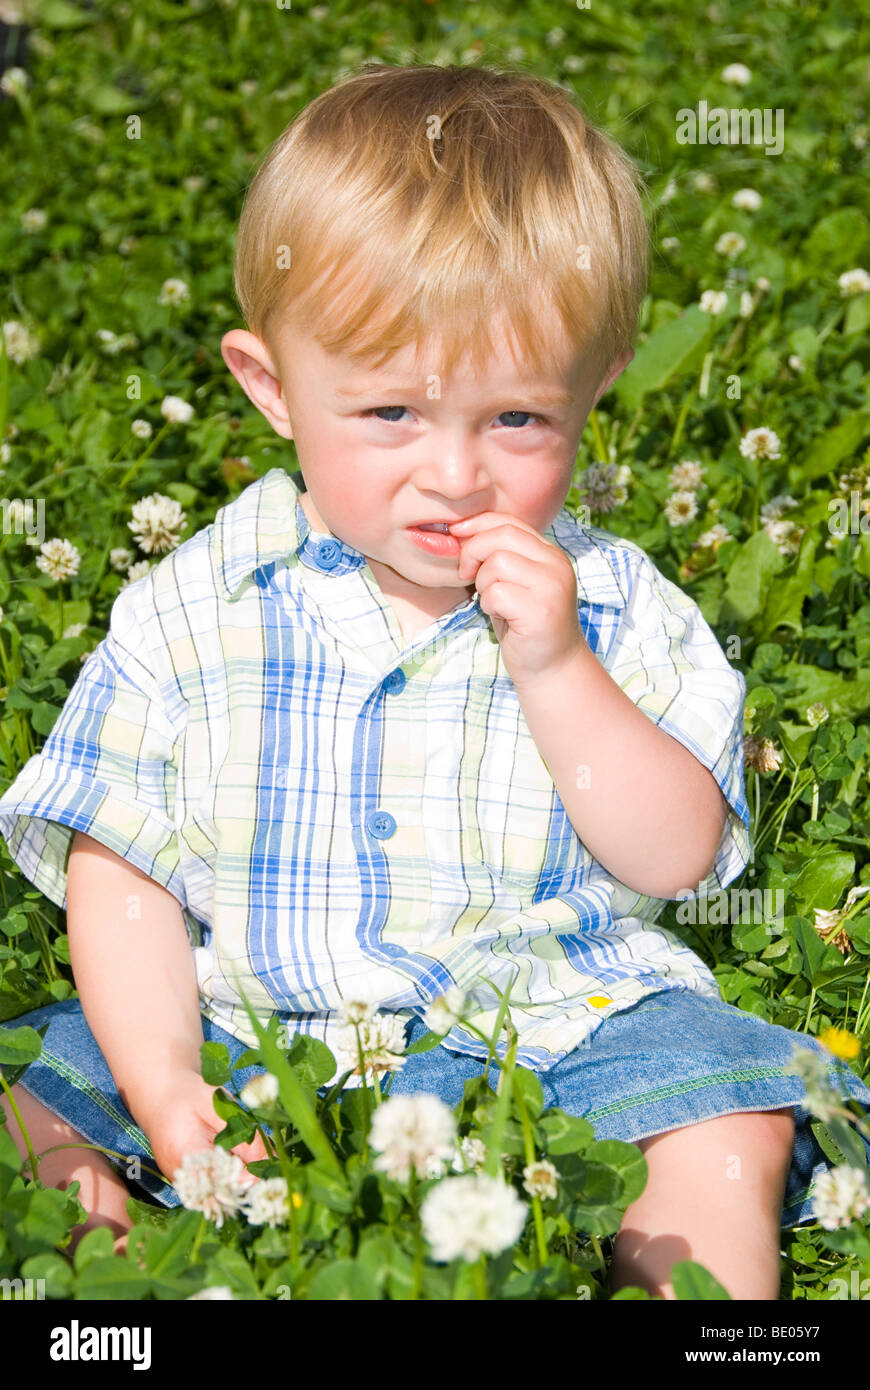 Little Boy Aged 14 Months Sitting Amongst White Clover Flowers on Summer Day Stock Photo